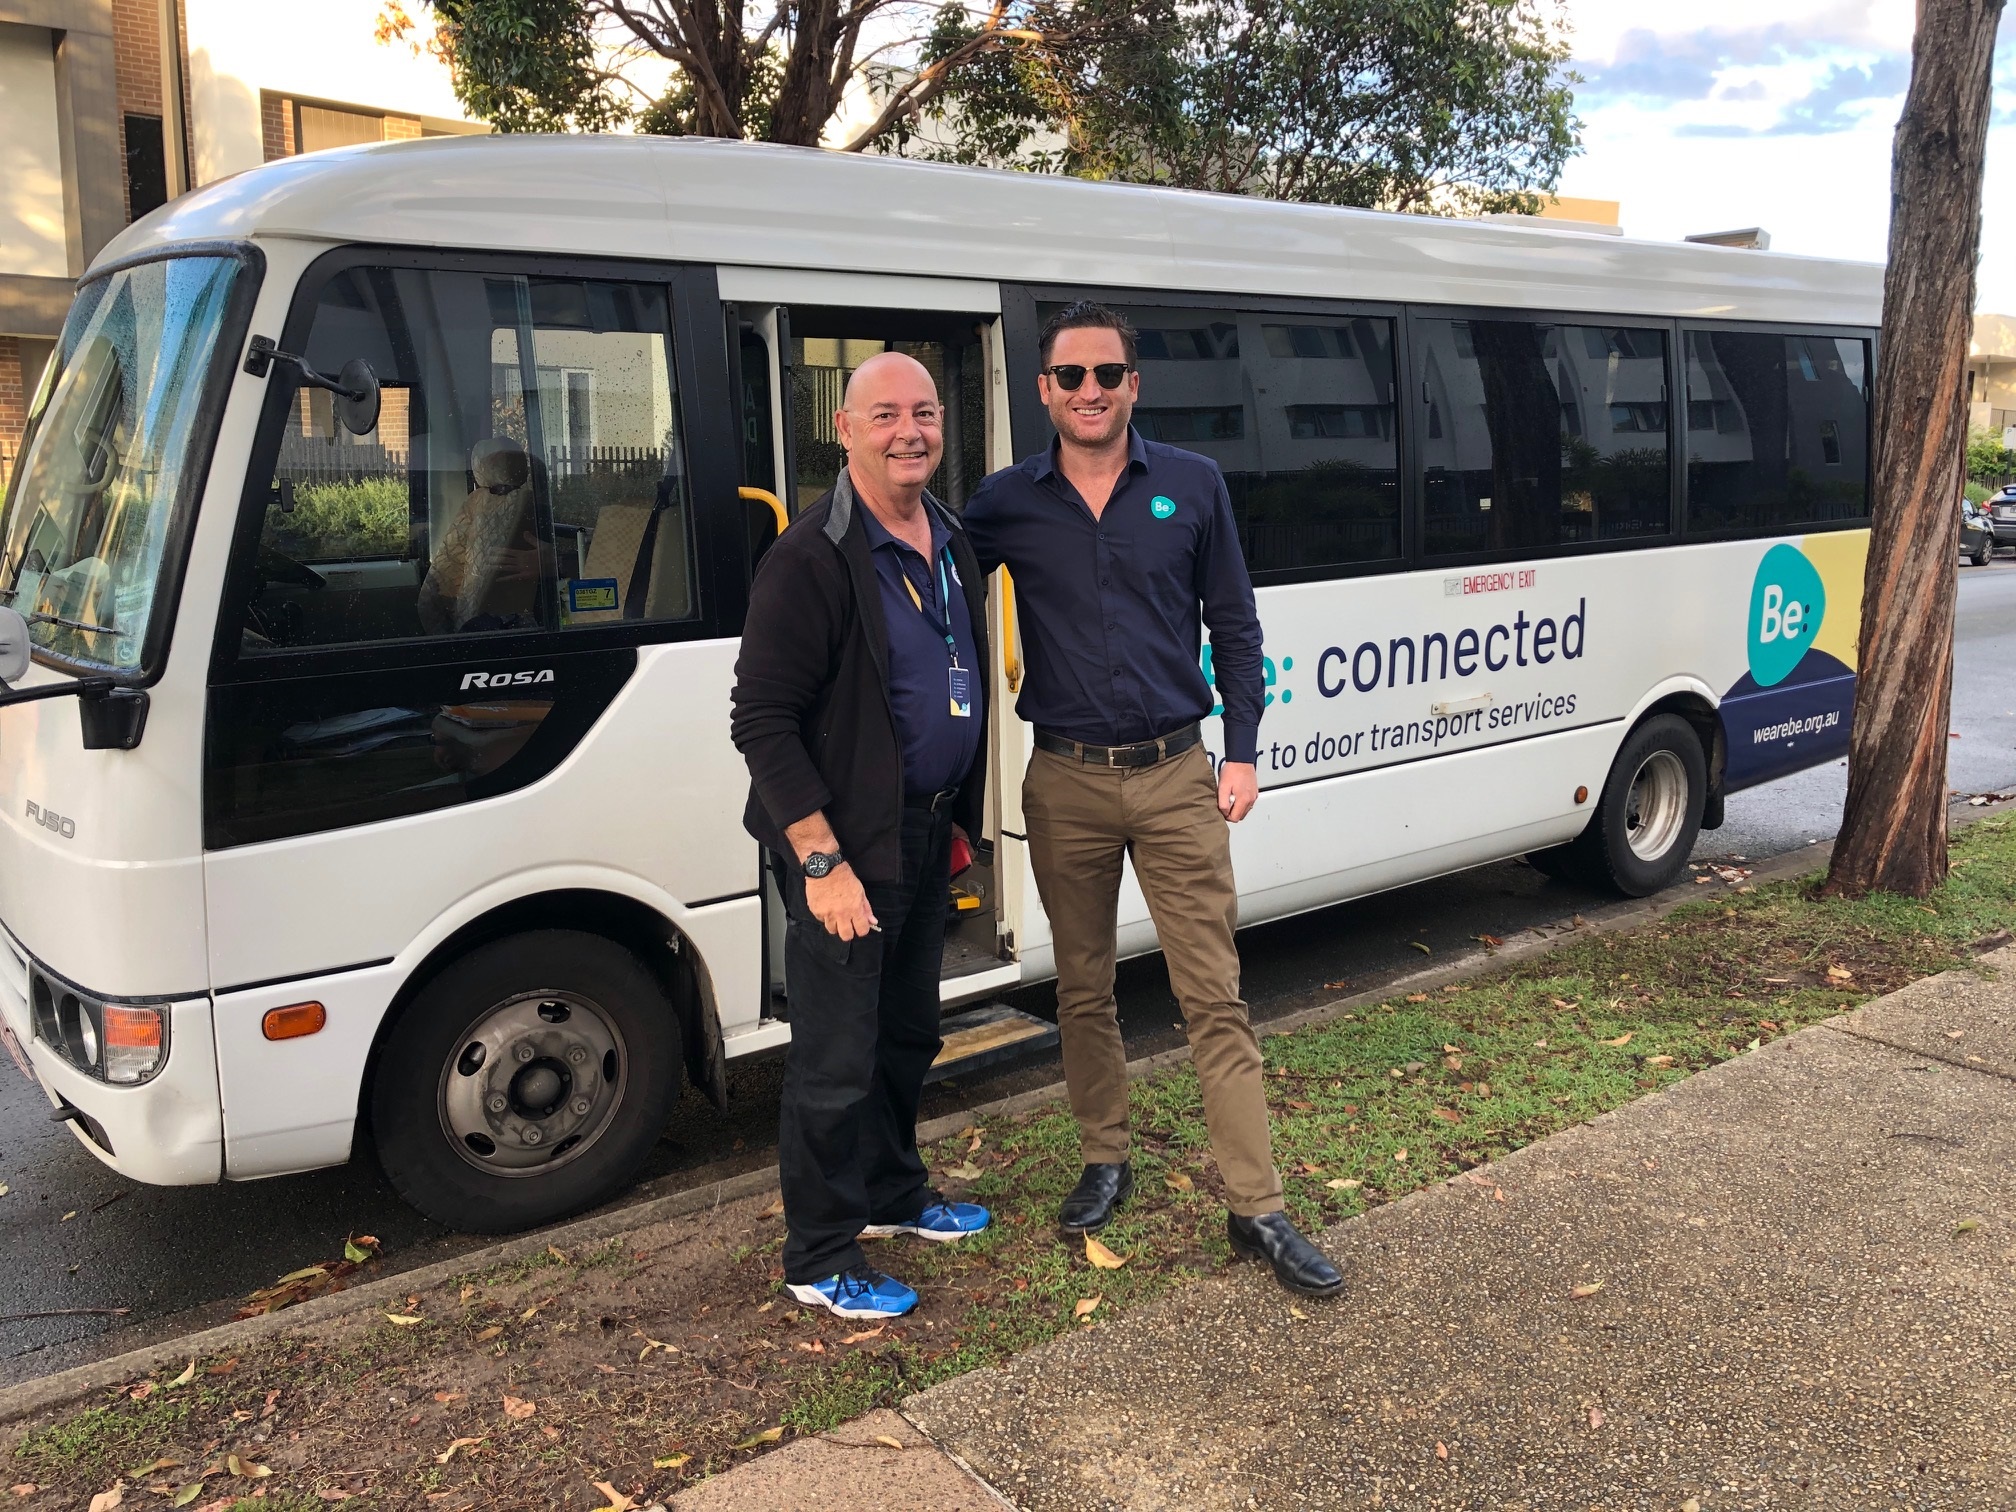 CEO and driver with bus